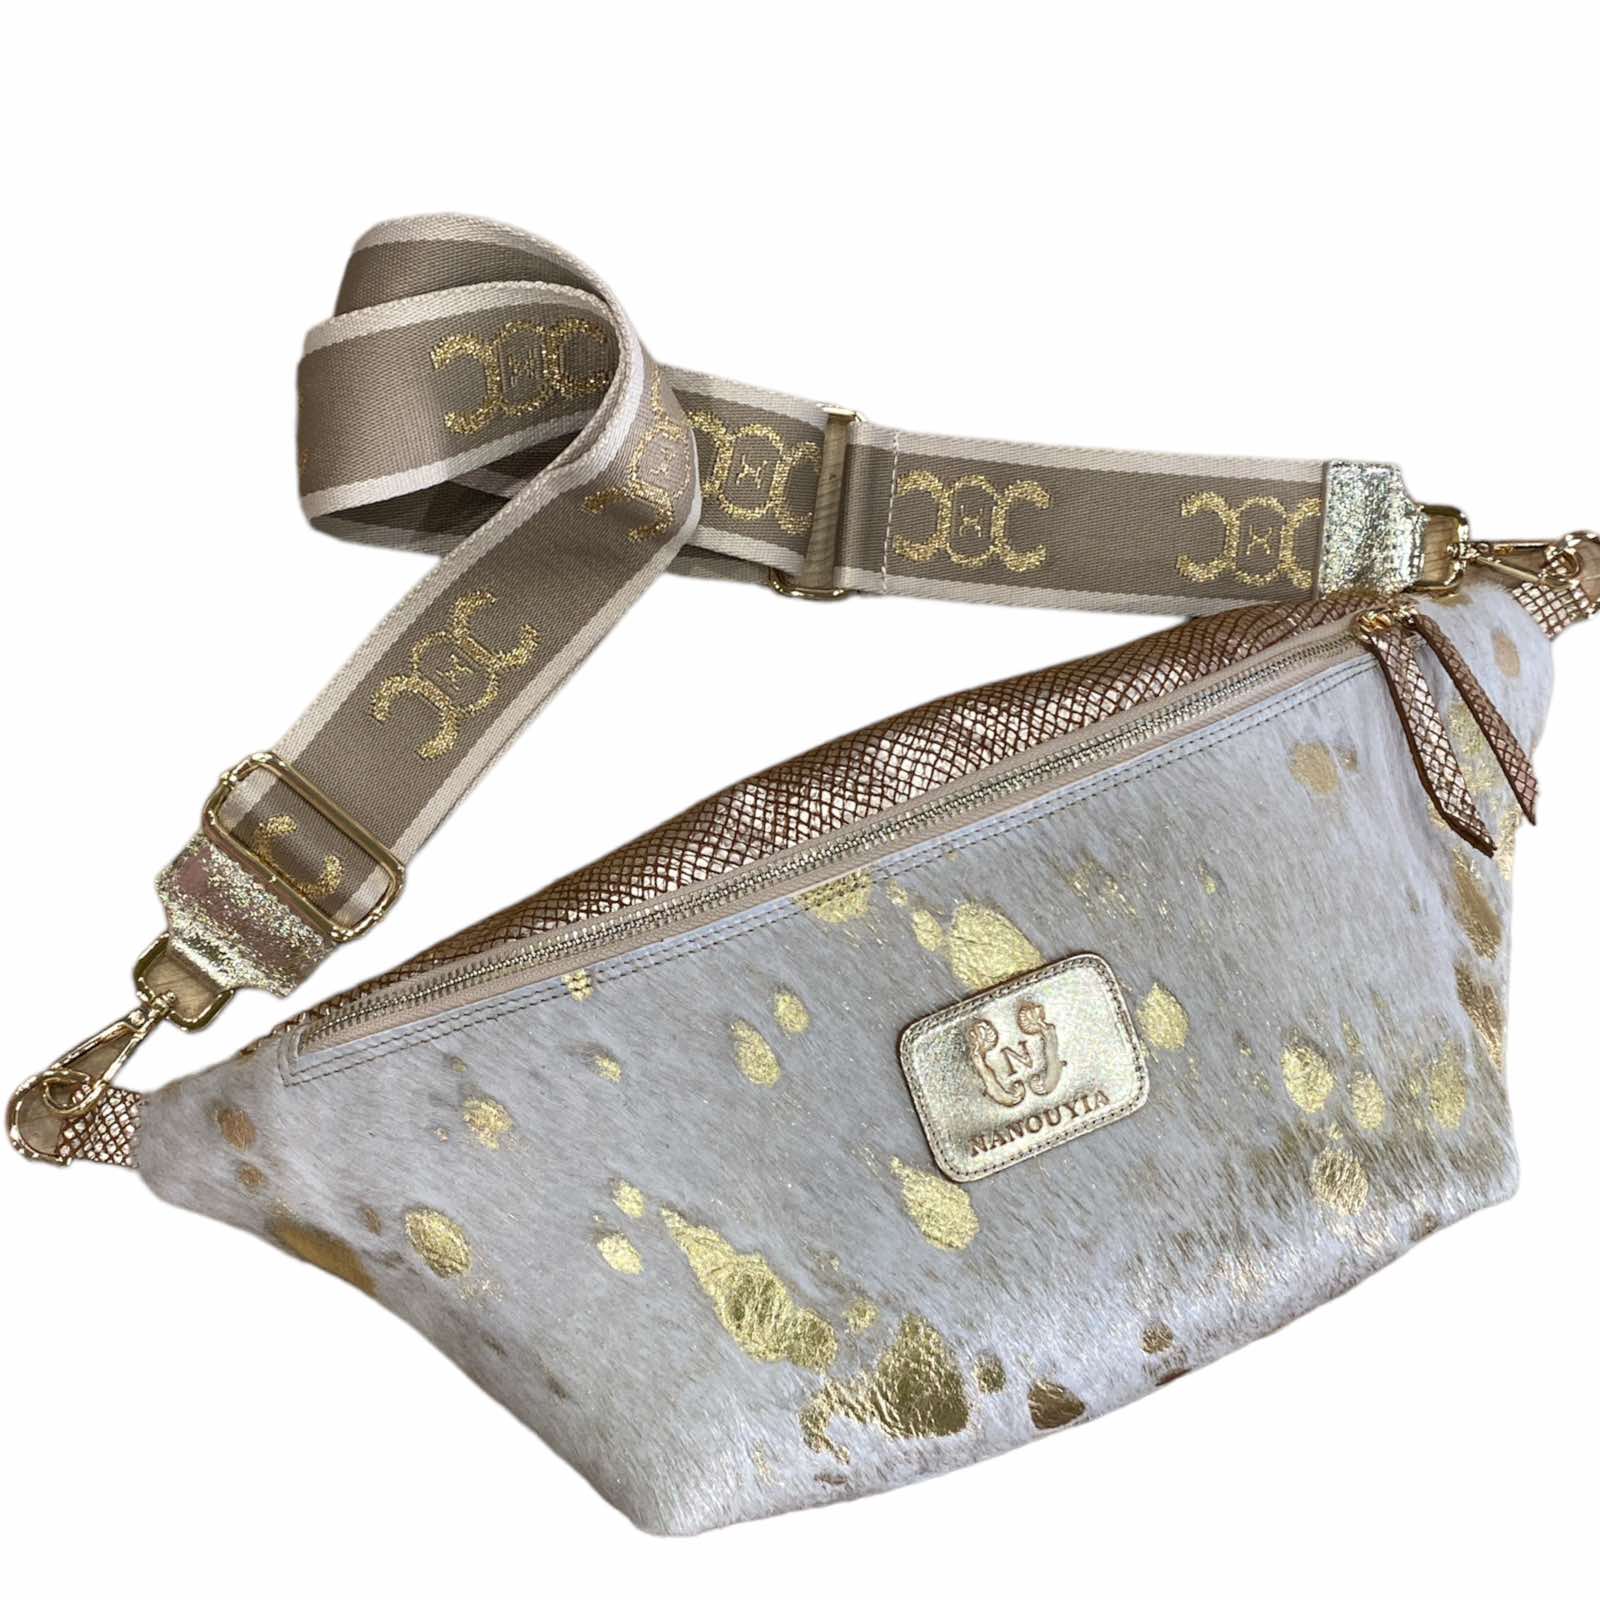 XXL off-white and gold vintage calf-hair leather belt bag